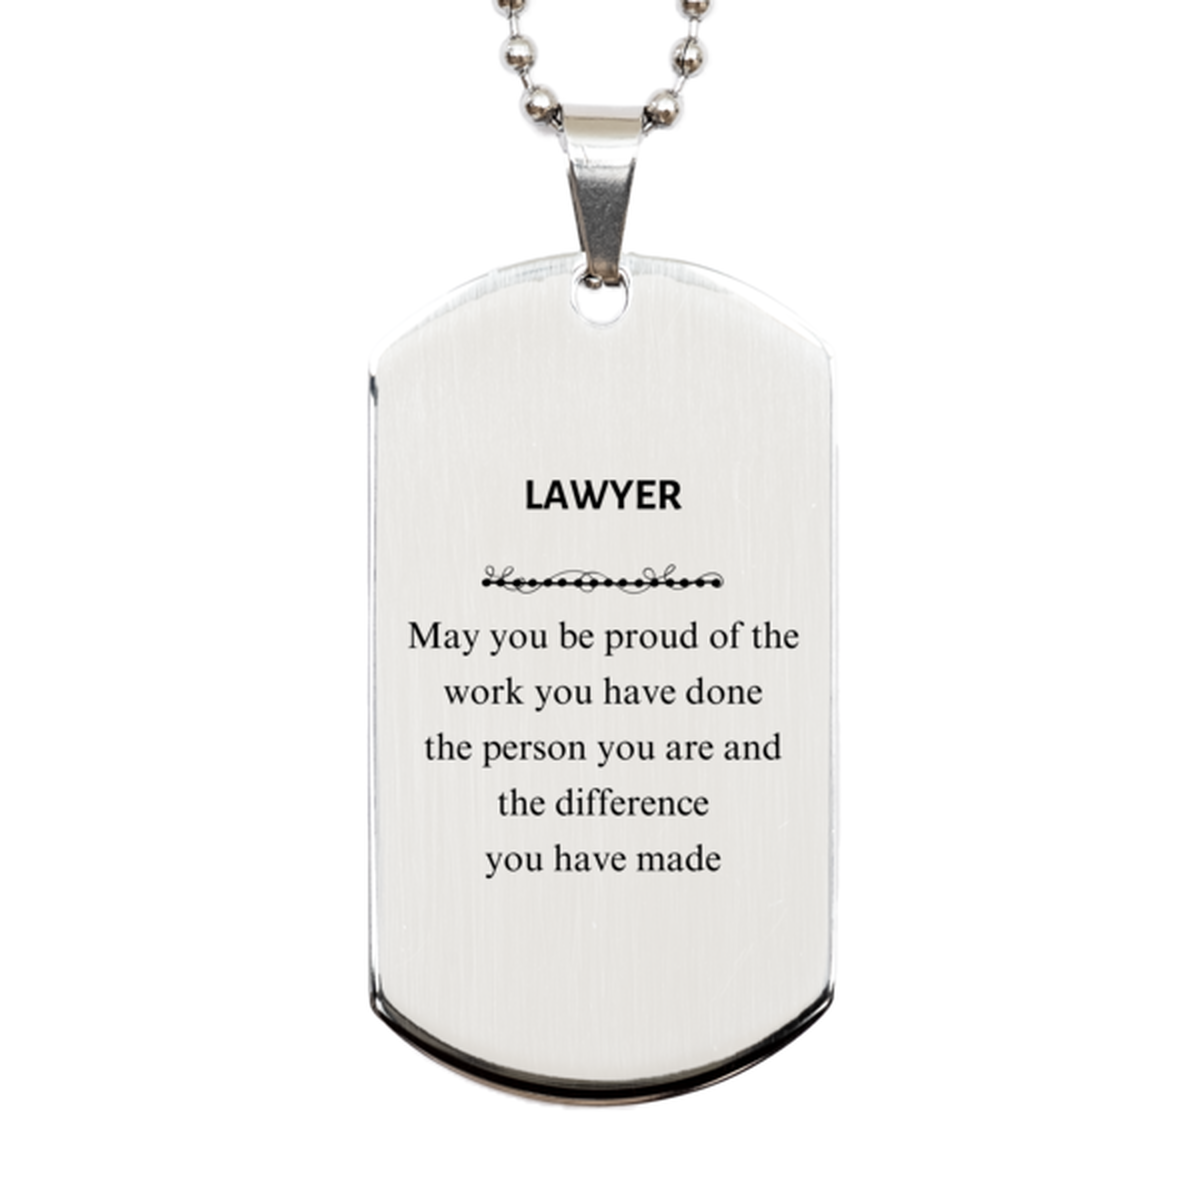 Lawyer May you be proud of the work you have done, Retirement Lawyer Silver Dog Tag for Colleague Appreciation Gifts Amazing for Lawyer